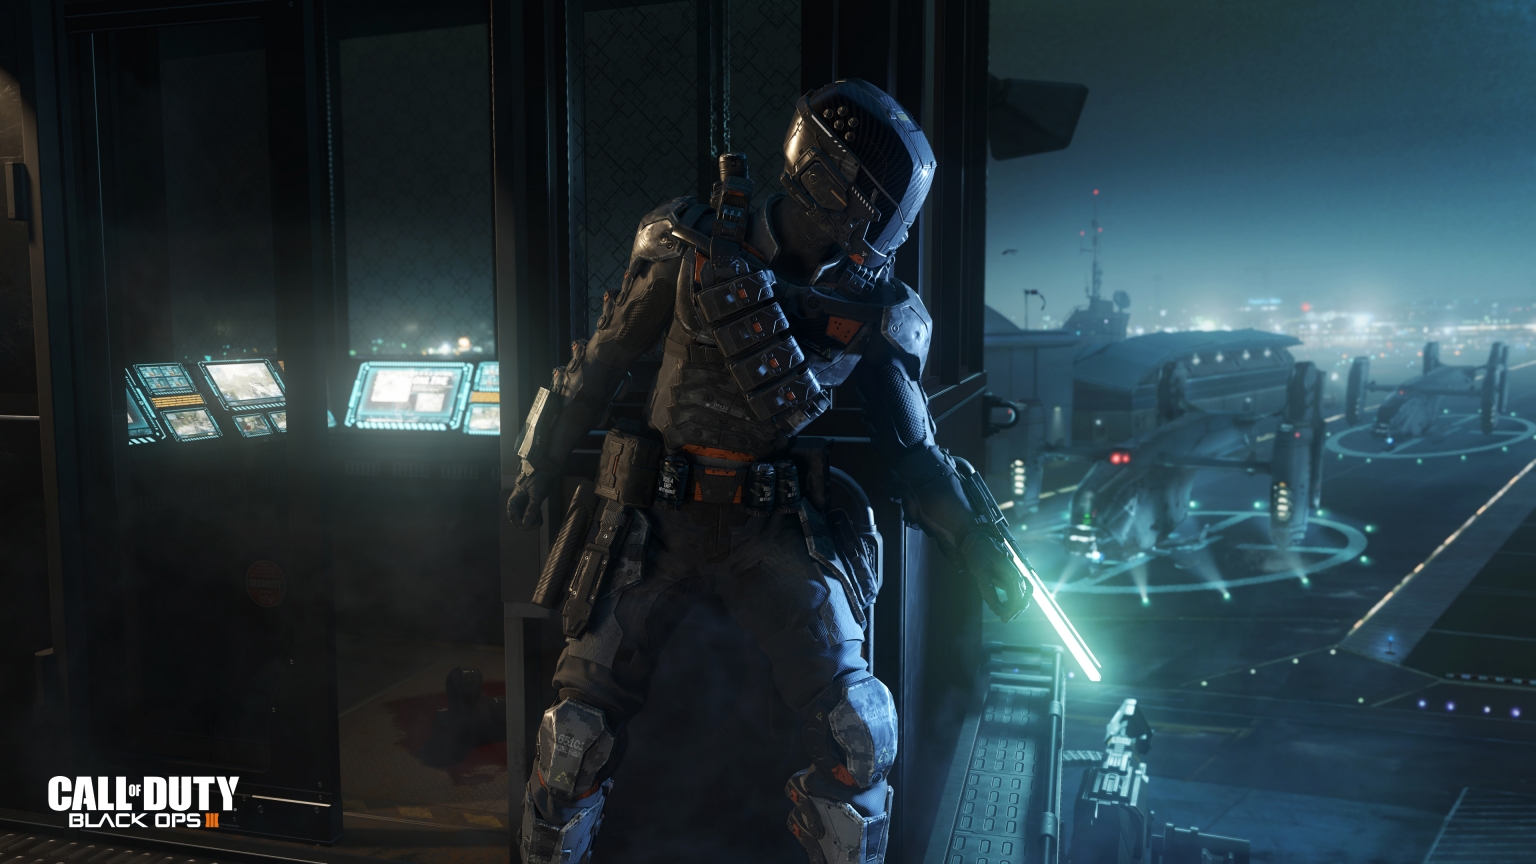 Call of Duty Black Ops 3 Specialist Spectre for 1536 x 864 HDTV resolution